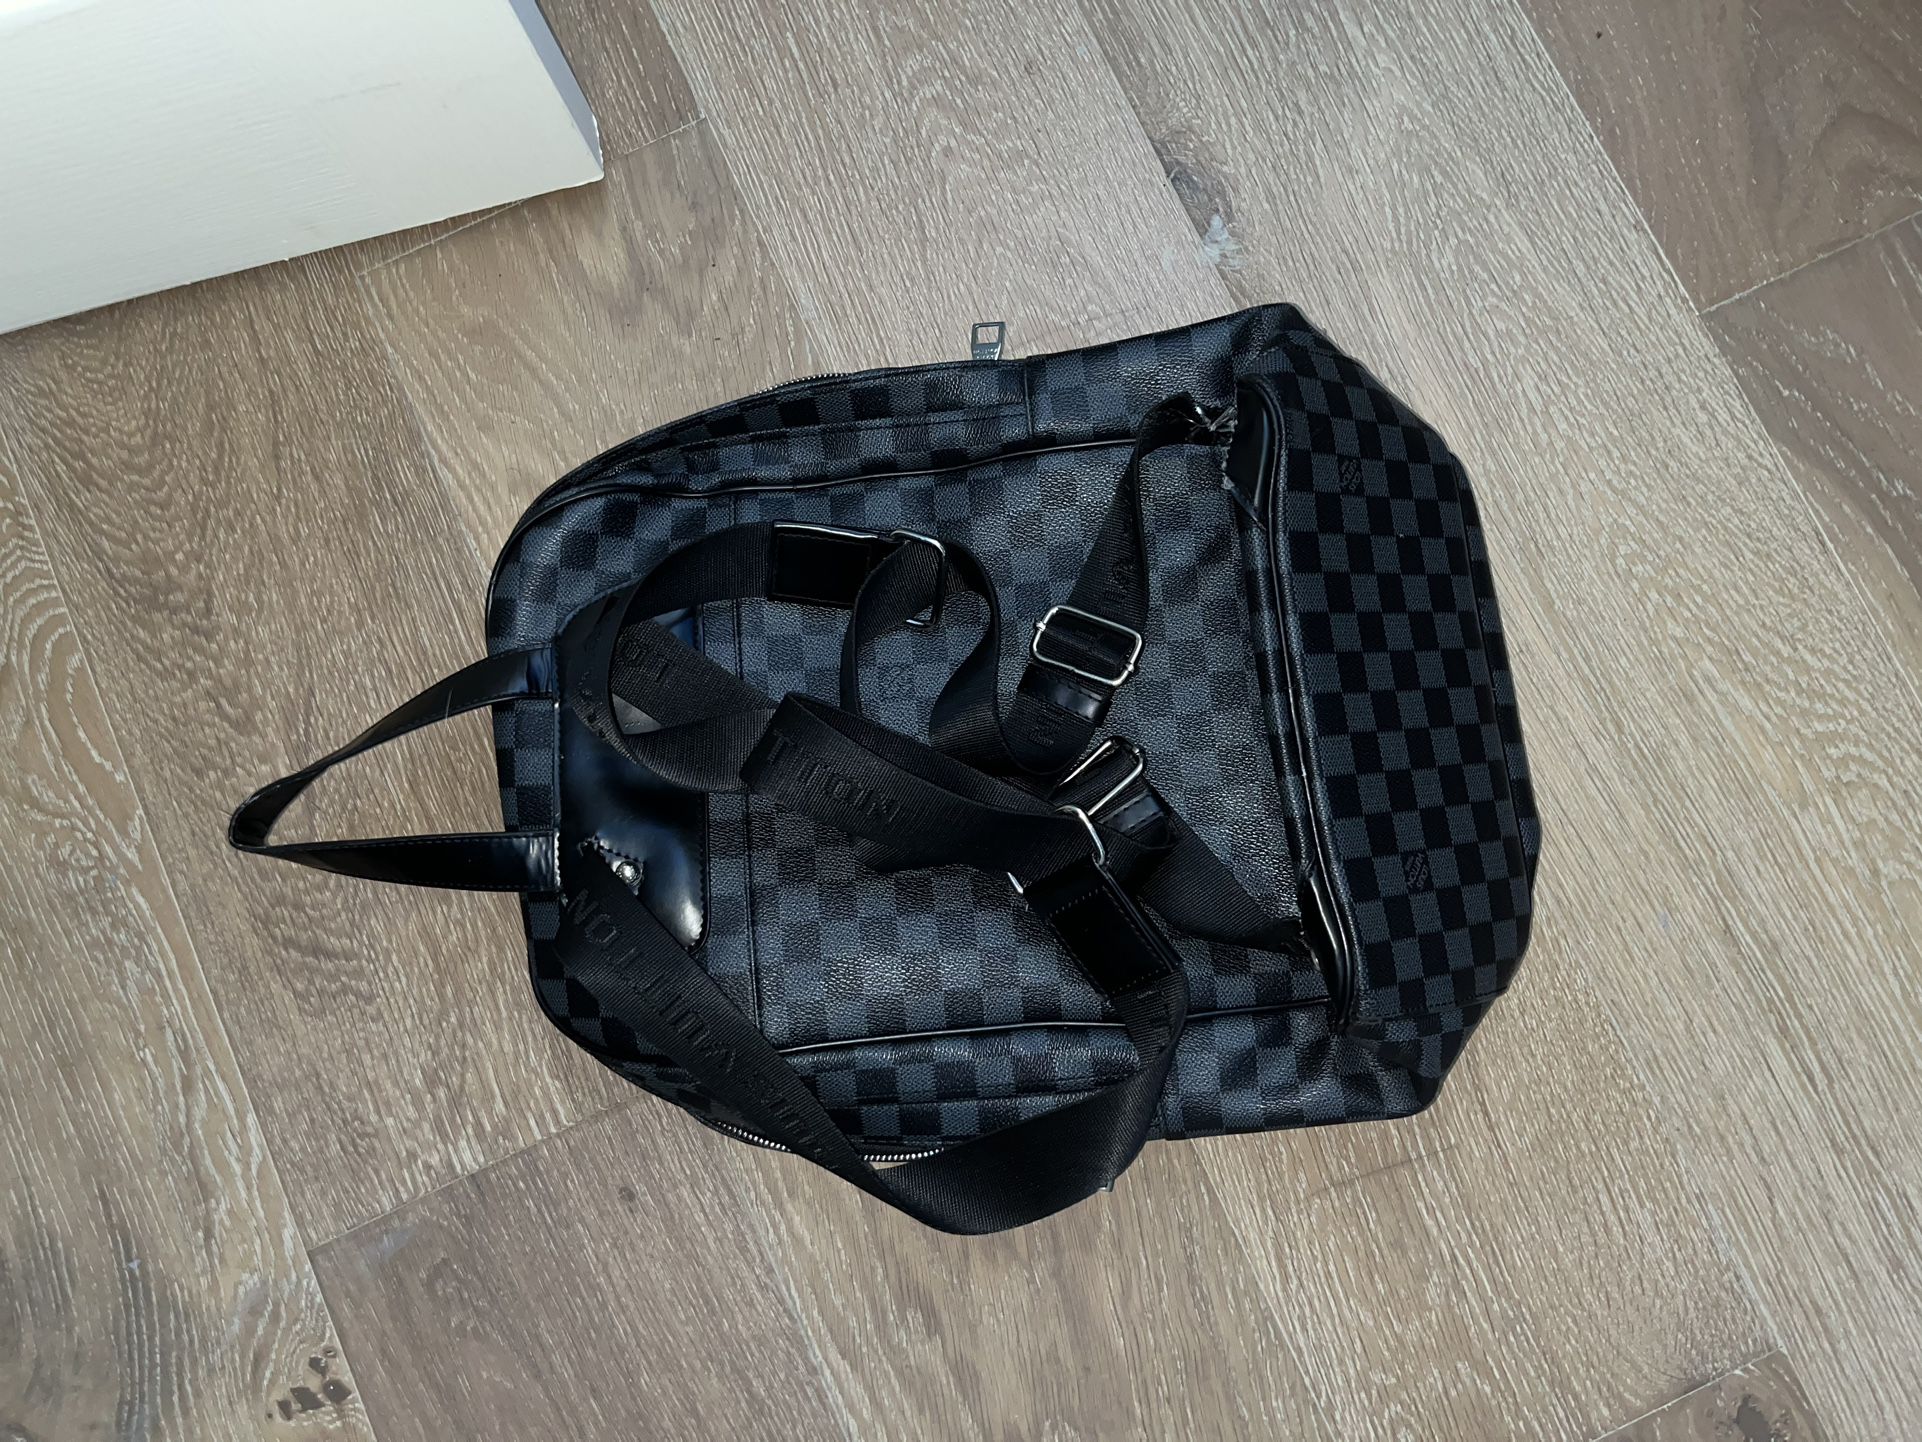 LOUIS VUITTON Damier Graphite Michael Backpack From the 2018 Collection  Black Coated Canvas Silver-Tone Hardware Flat Handle & Dual…